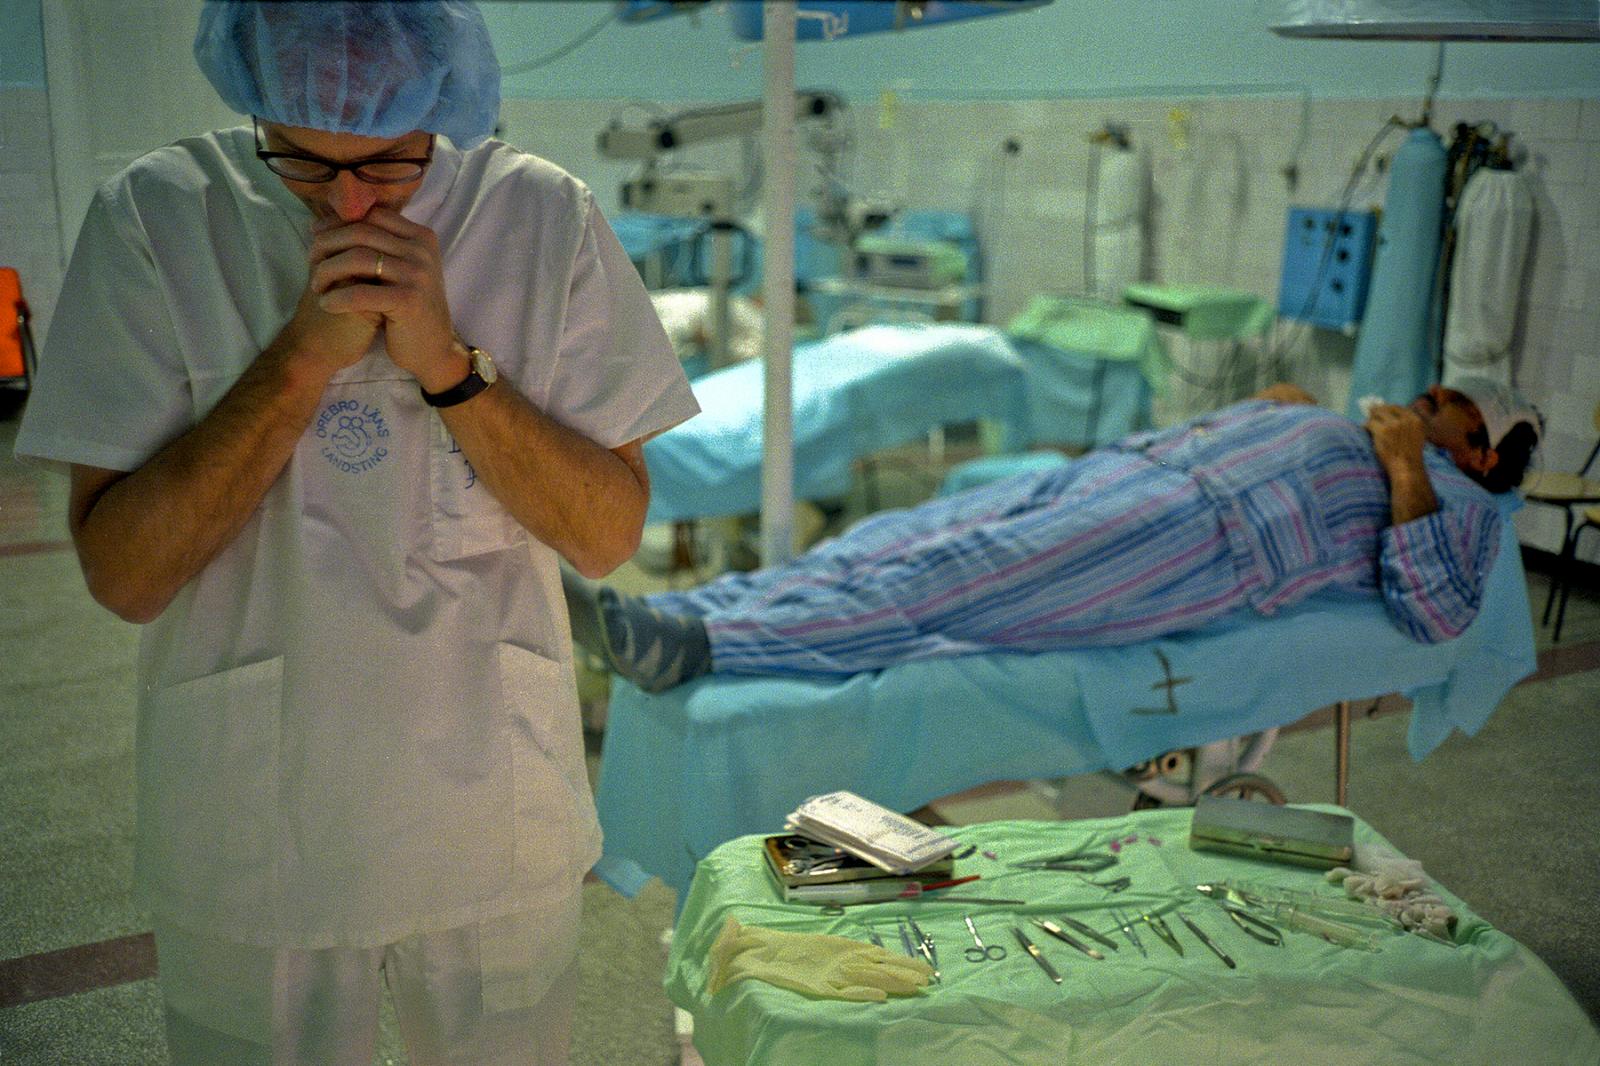 A surgeon working with the Huma...act operation in Iași, Romania.